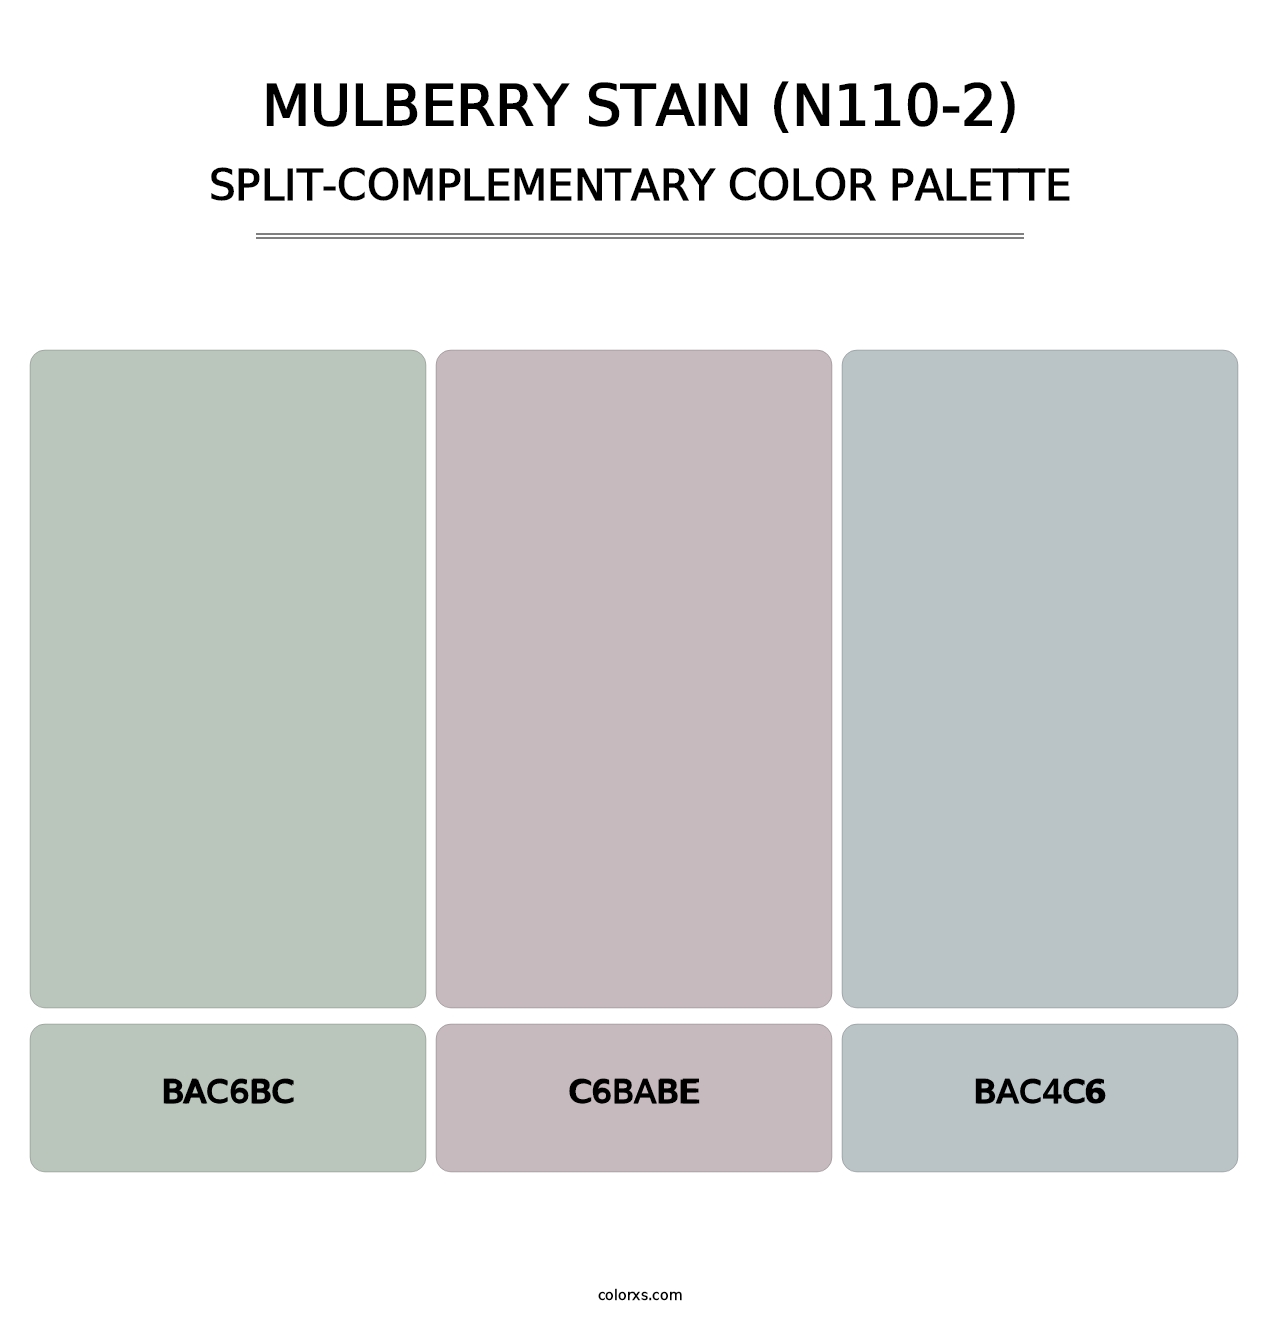 Mulberry Stain (N110-2) - Split-Complementary Color Palette